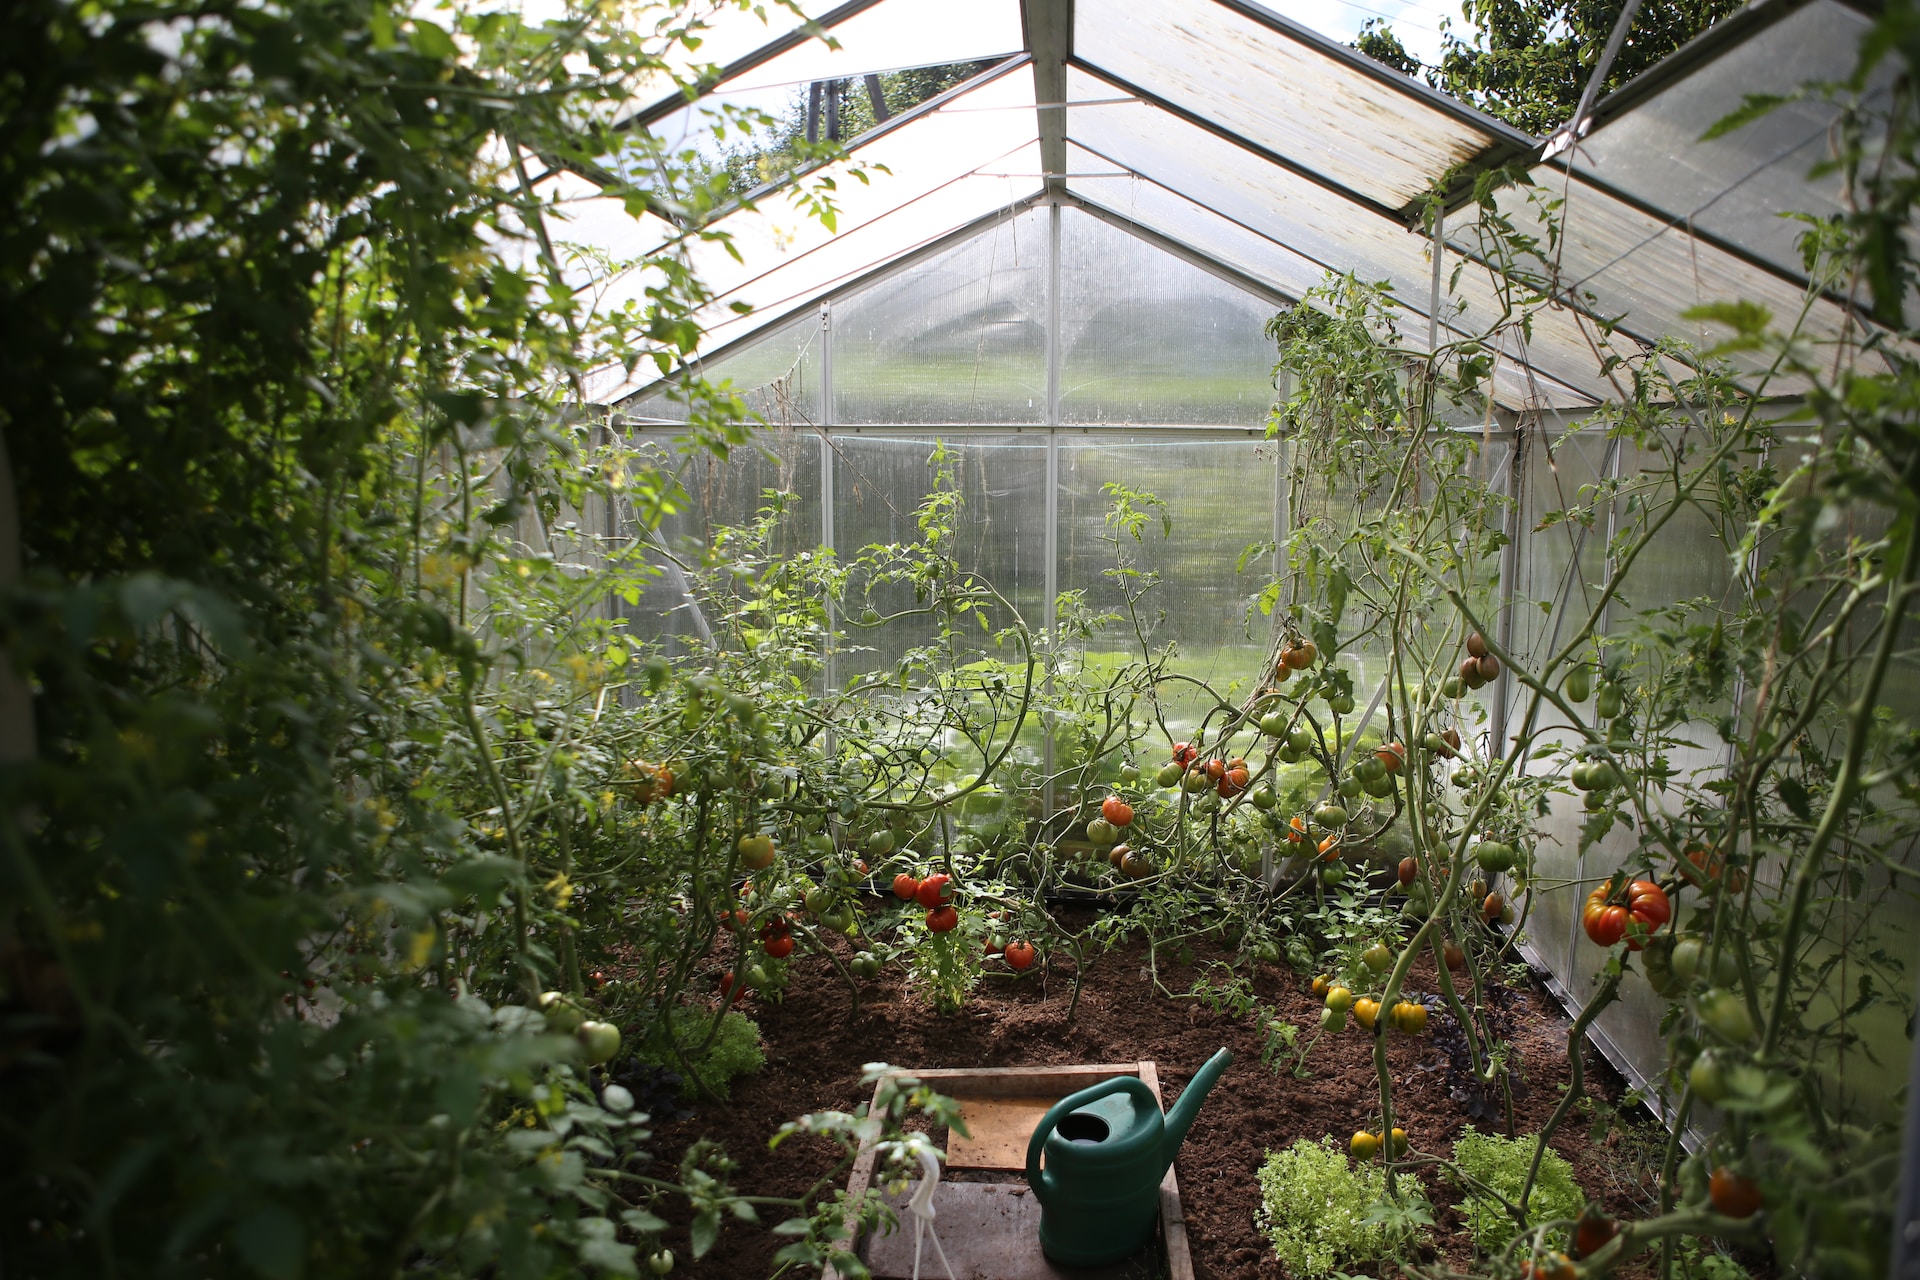 Greenhouse structures use the power of the sun to heat the room and allow for the growing season